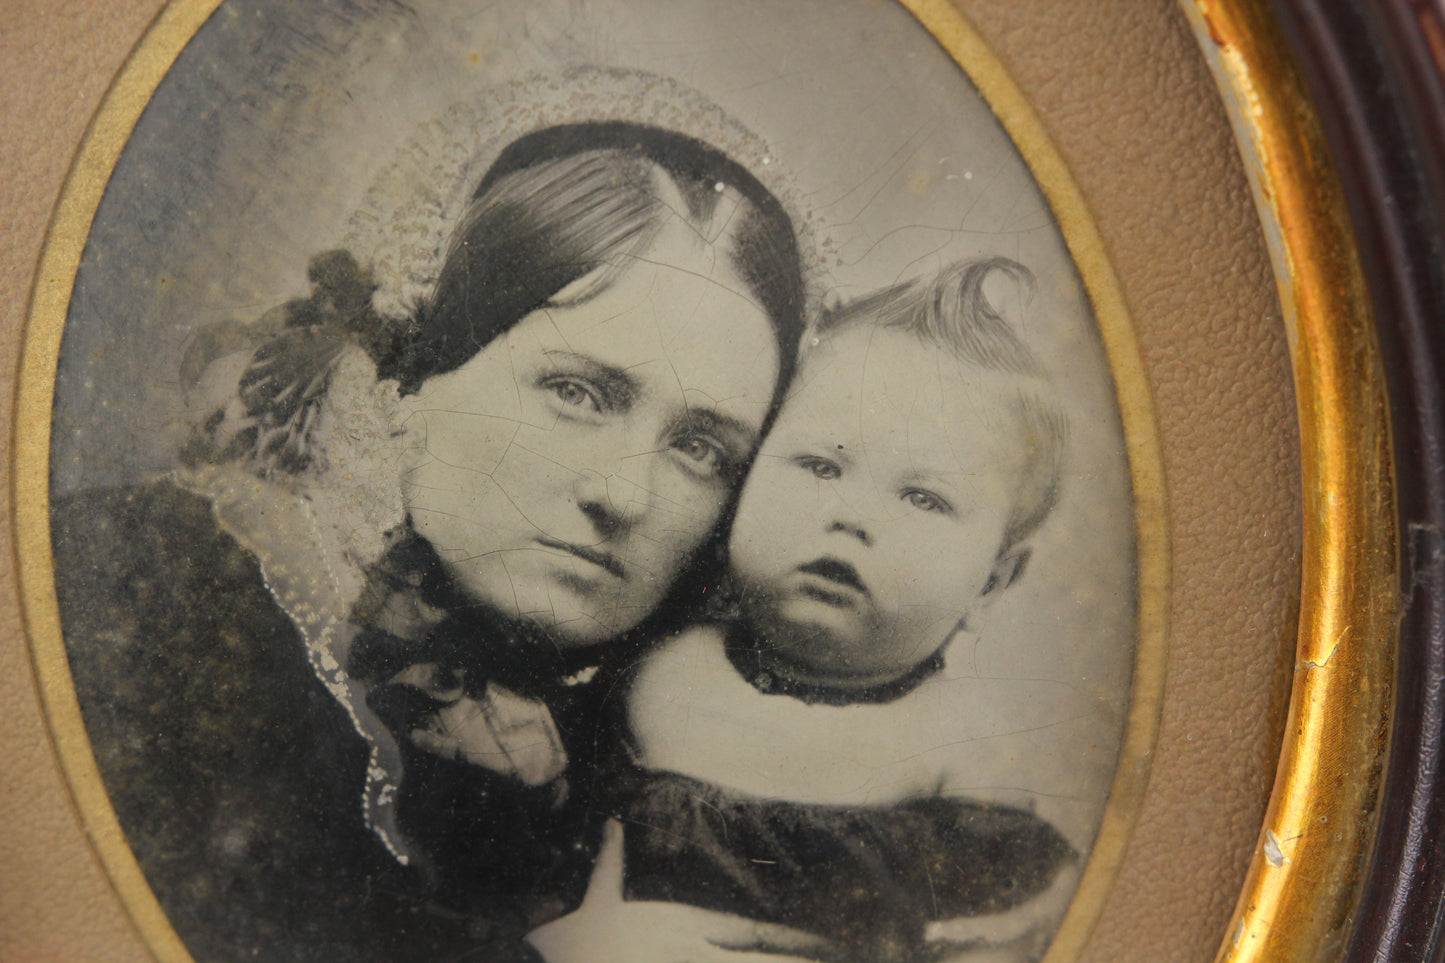 Half Plate Tintype Photograph of Mother and Child in an Oval Frame - 8 x 9.5"